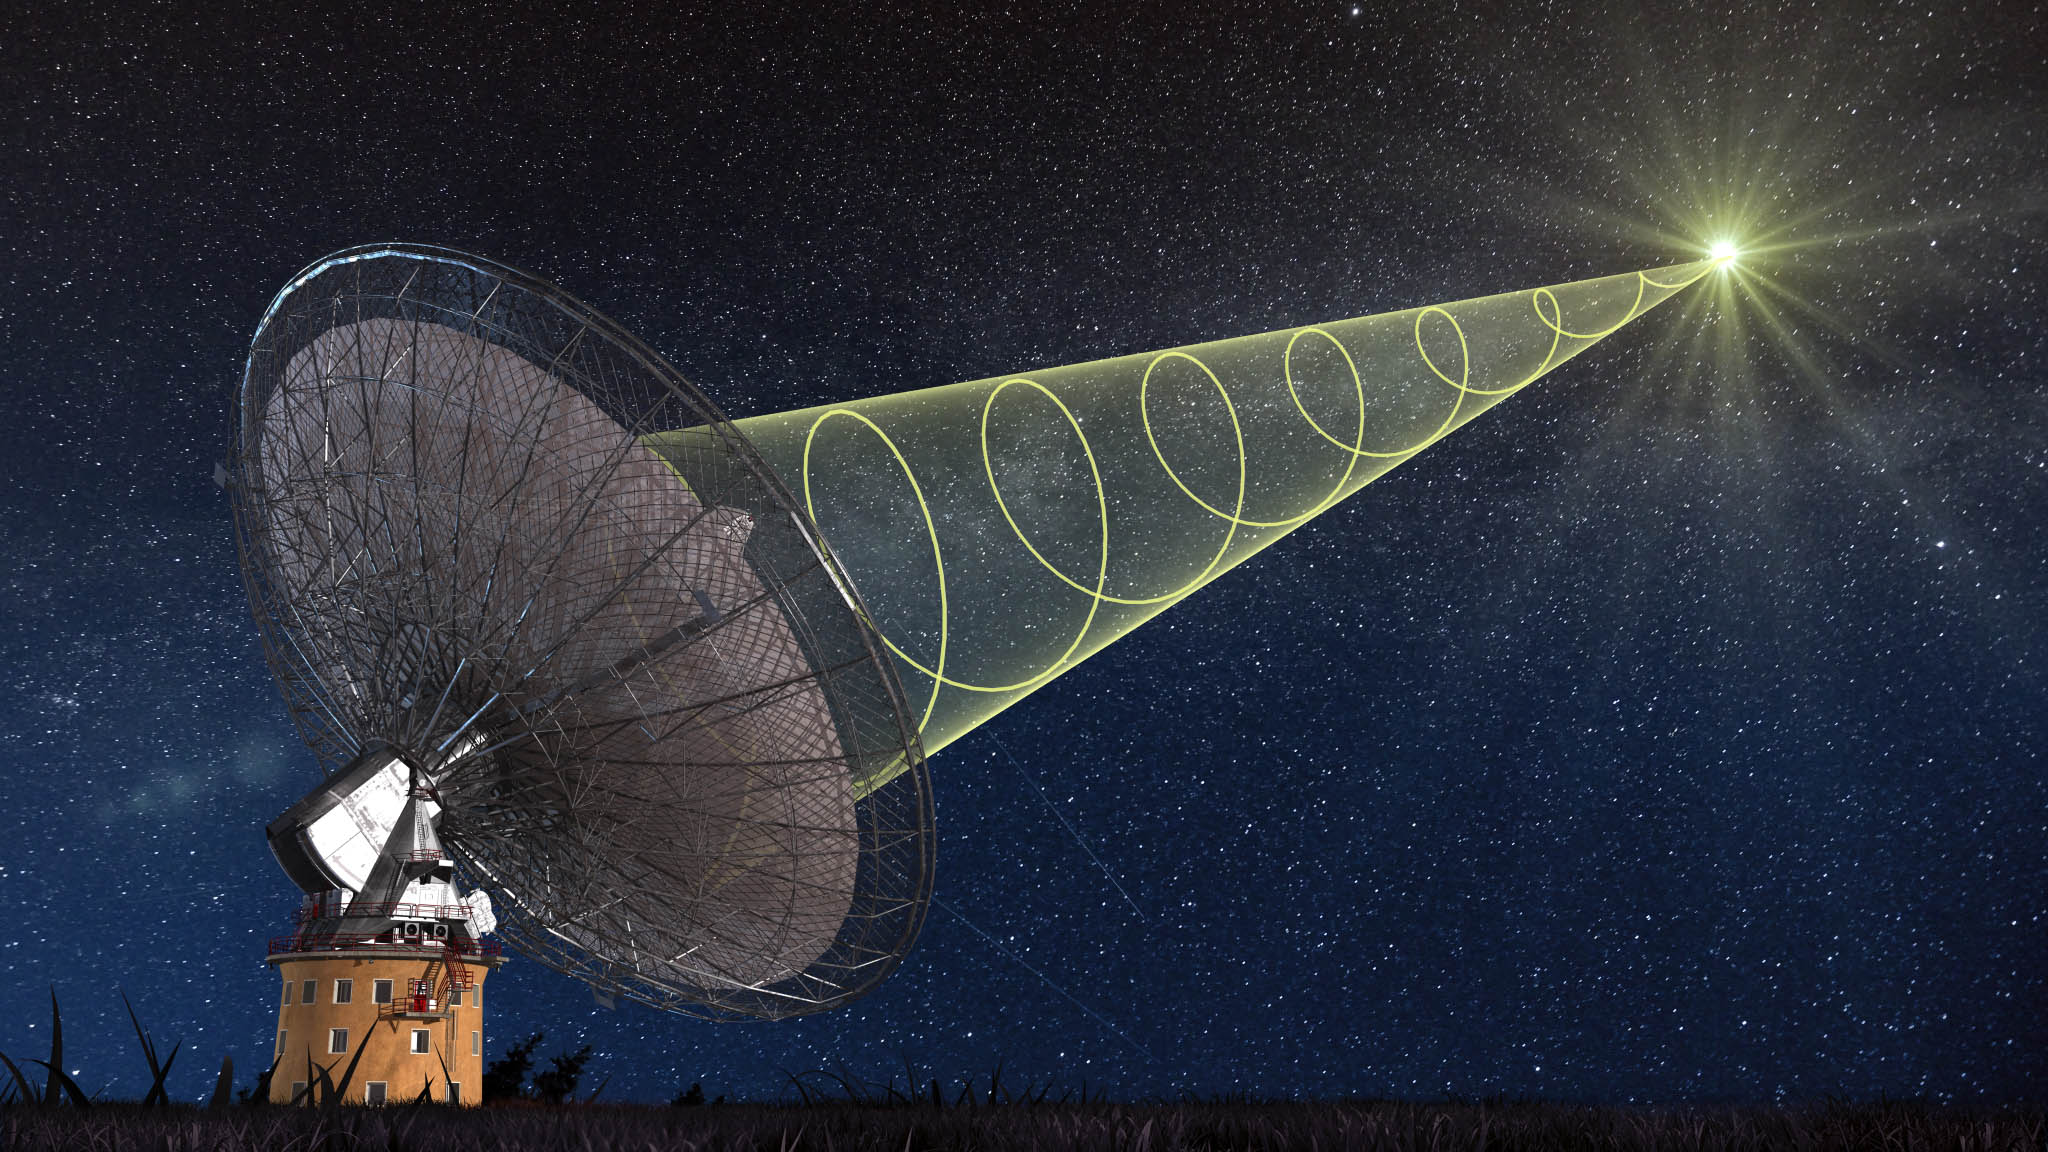 A schematic illustration of the Parkes radio telescope receiving the polarised signal from the distant fast radio burst FRB 140514, the first one to be discovered by astronomers in real-time. Image Credit: Swinburne Astronomy Productions